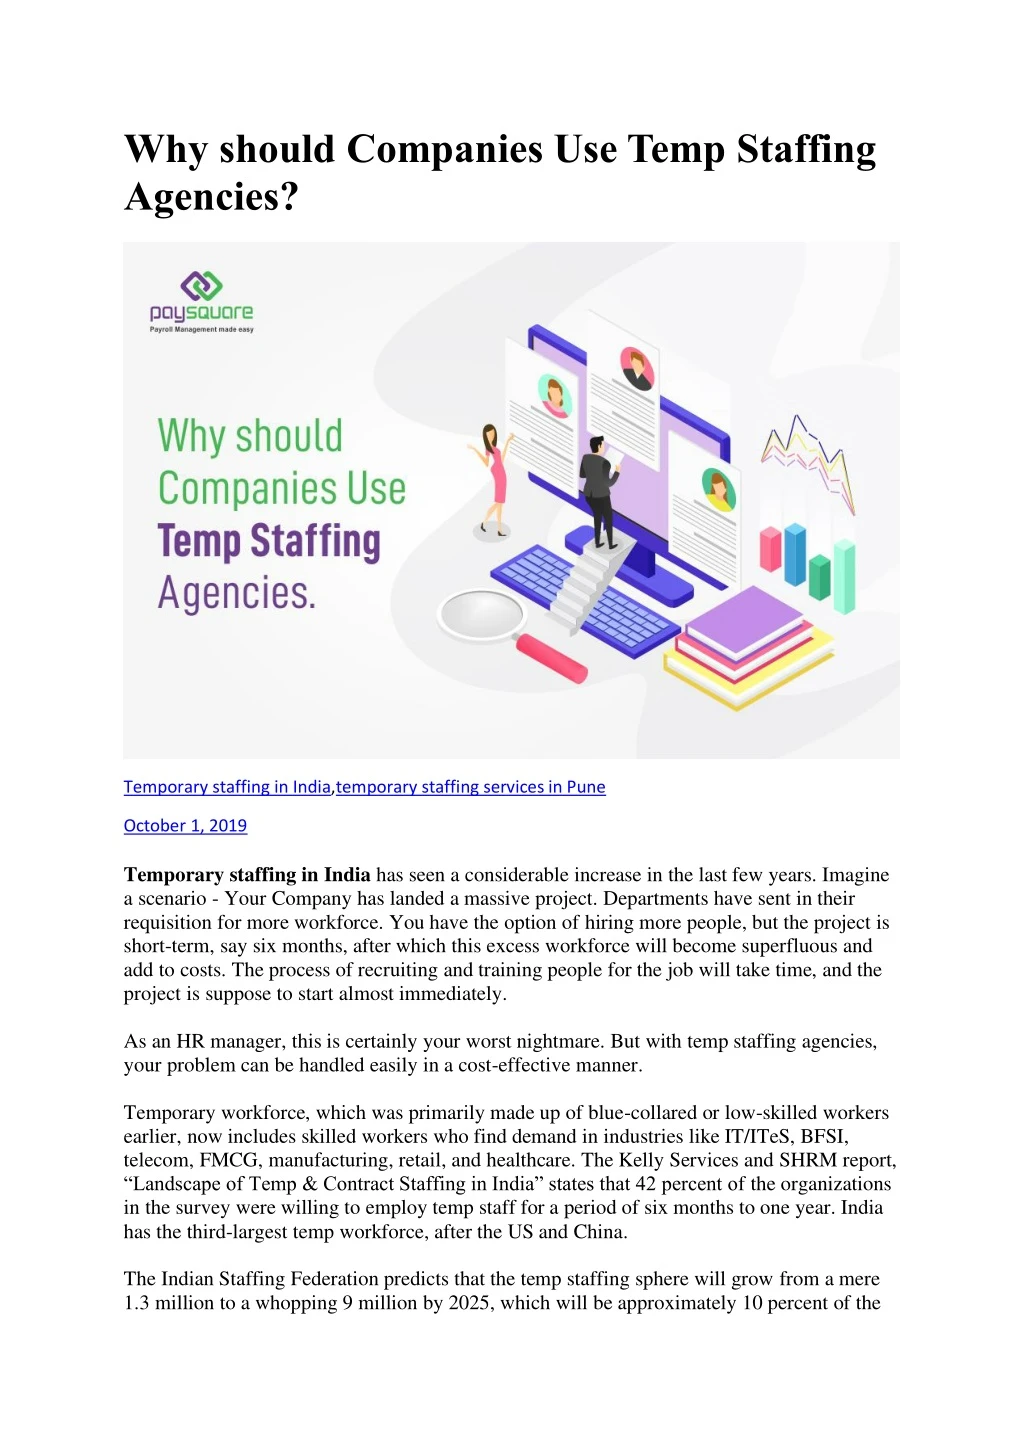 why should companies use temp staffing agencies